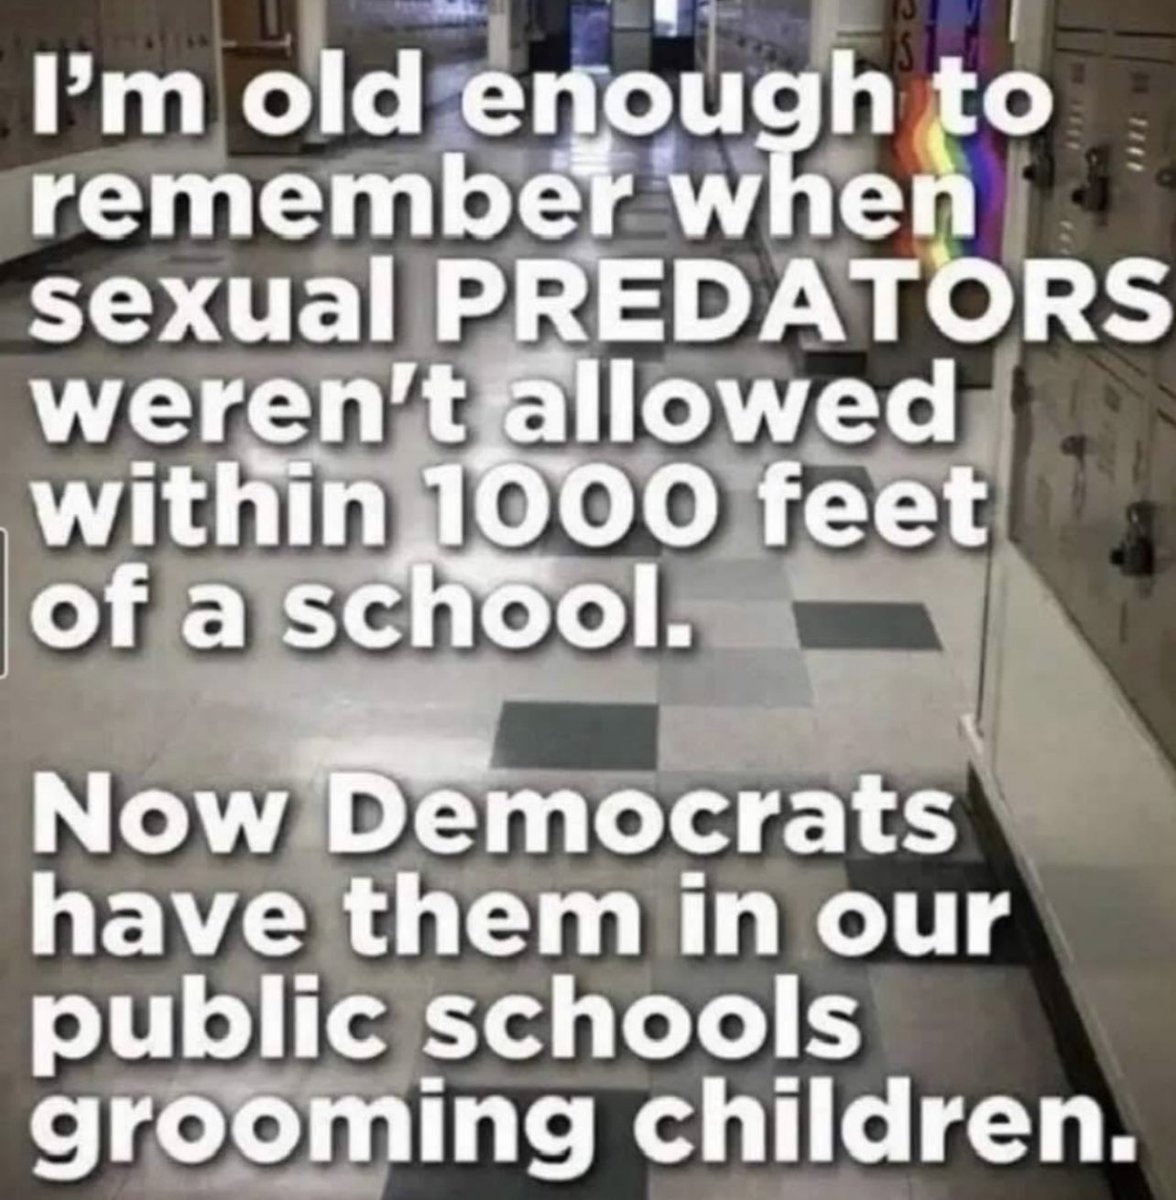 I firmly believe the Democratic Party is determined to make pedophilia legal to accommodate their rich liberal donors !!